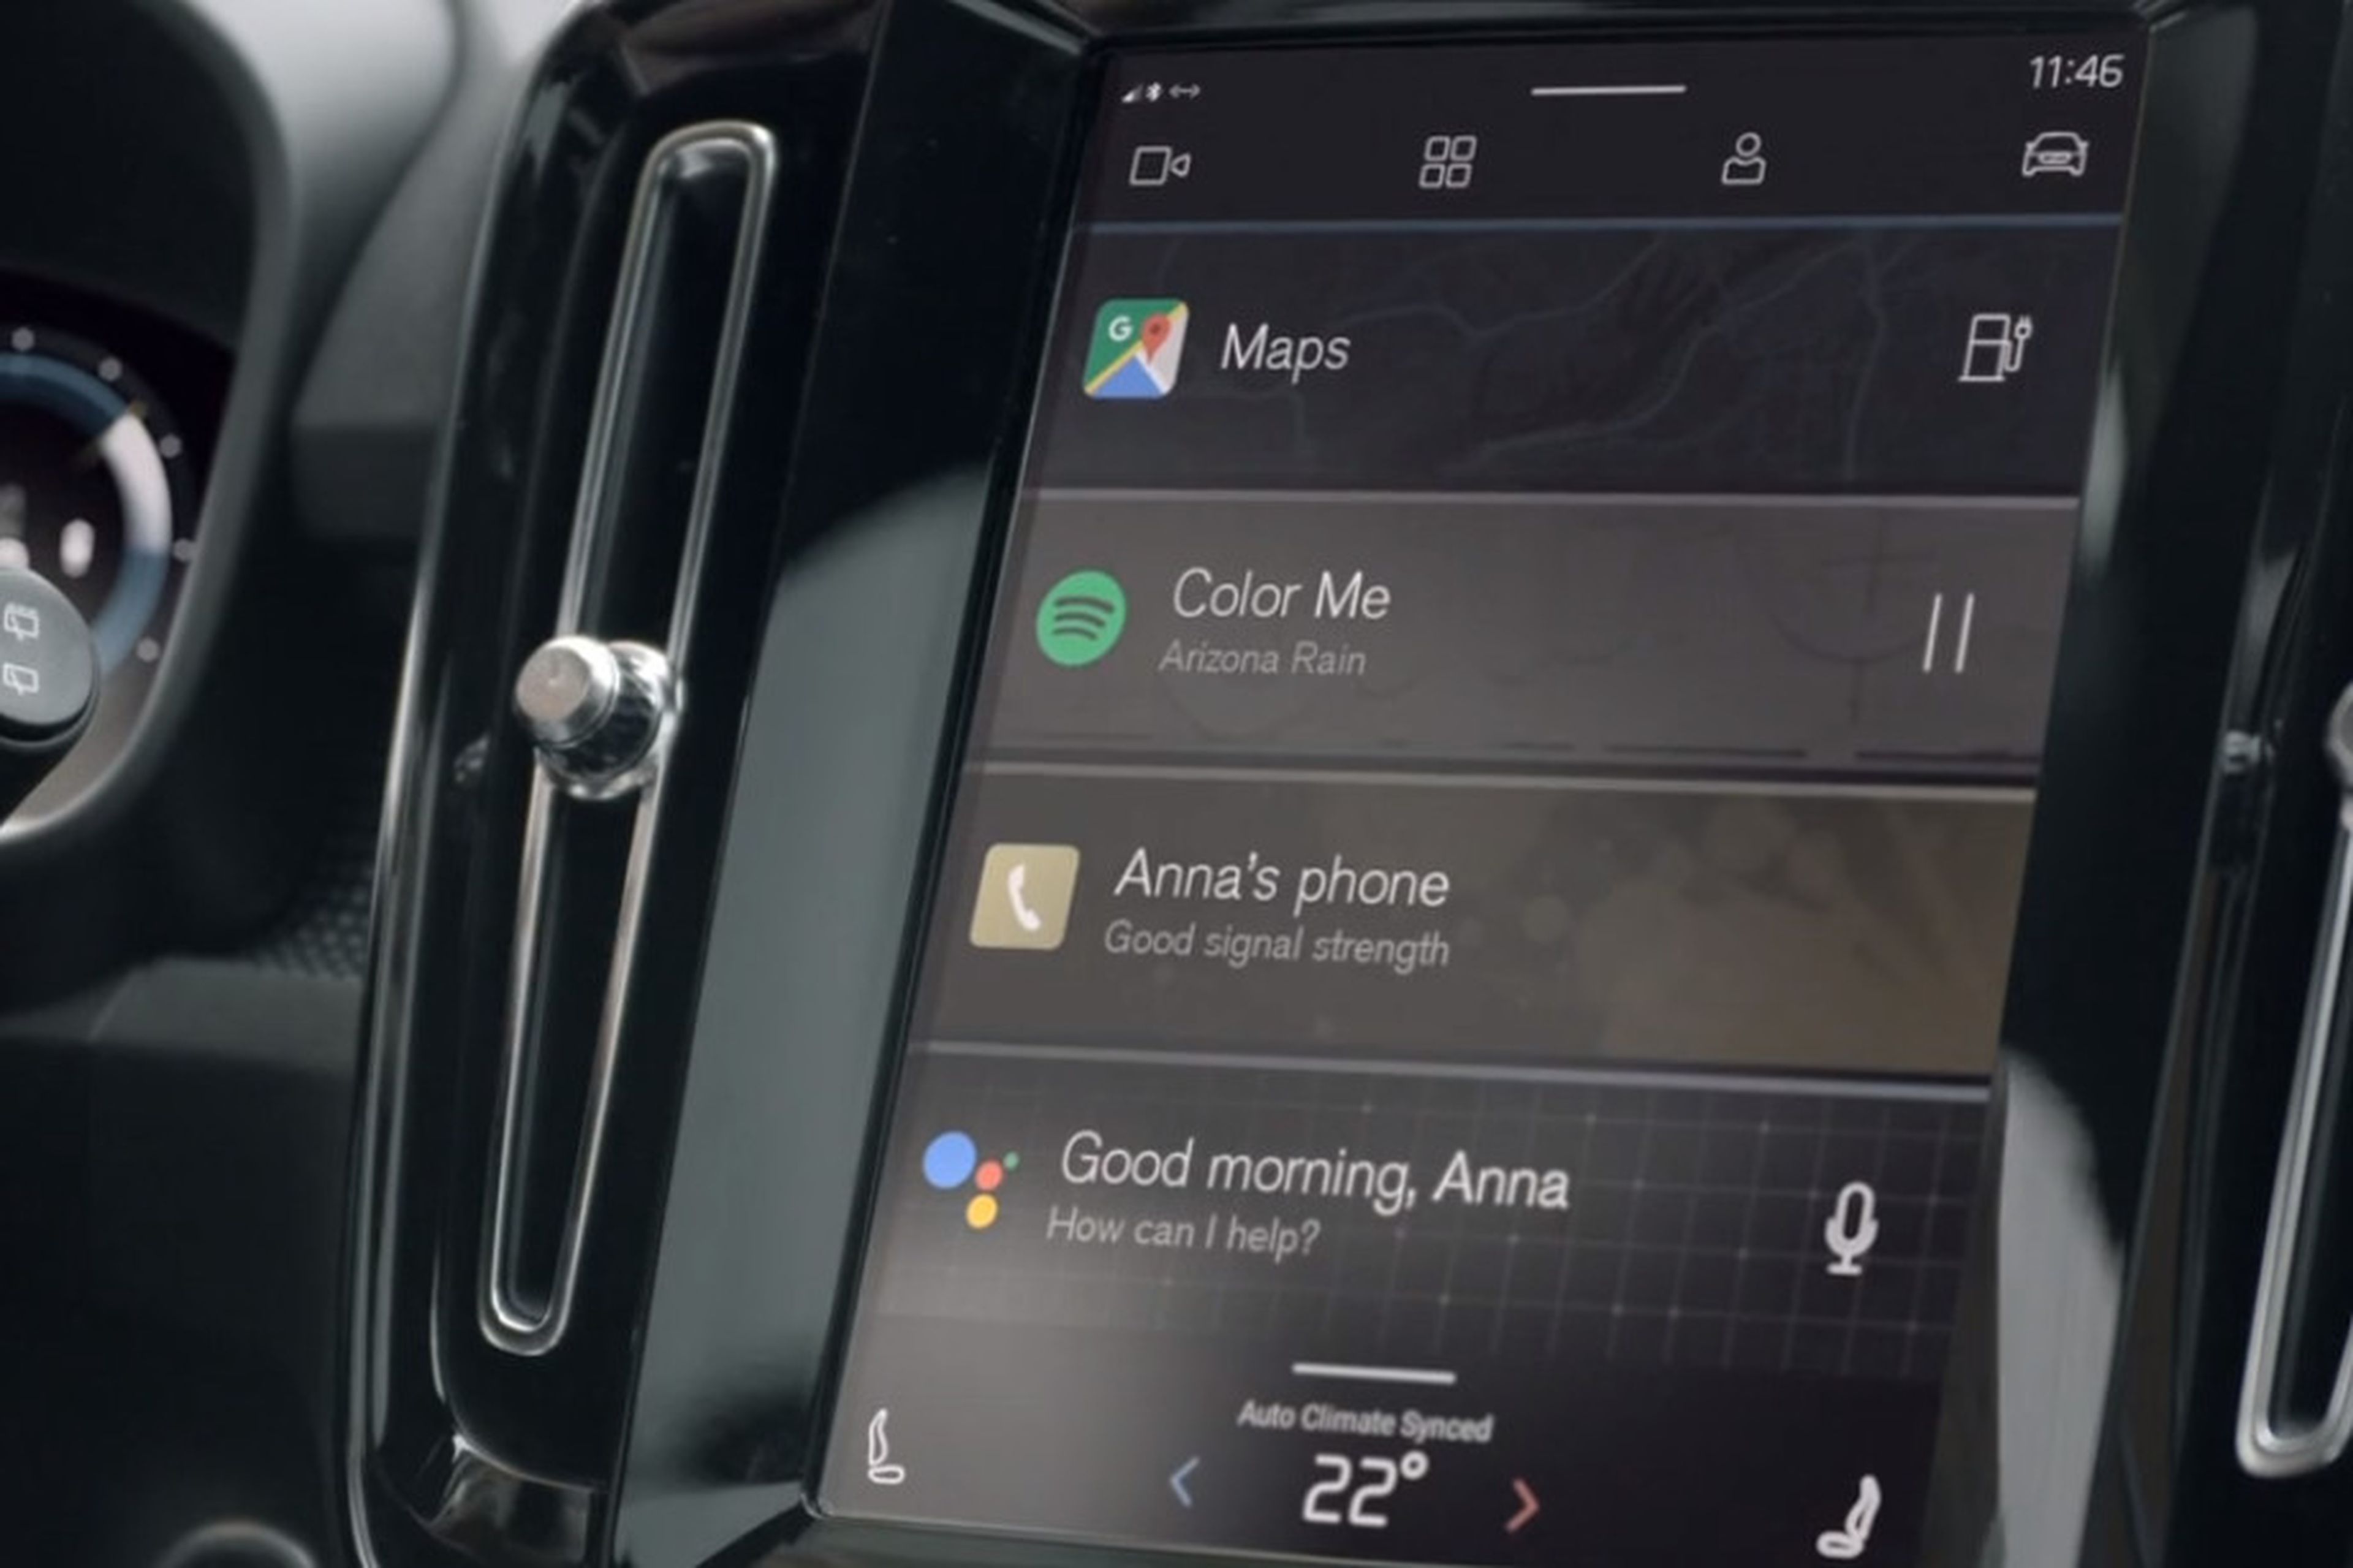 Android Automotive OS